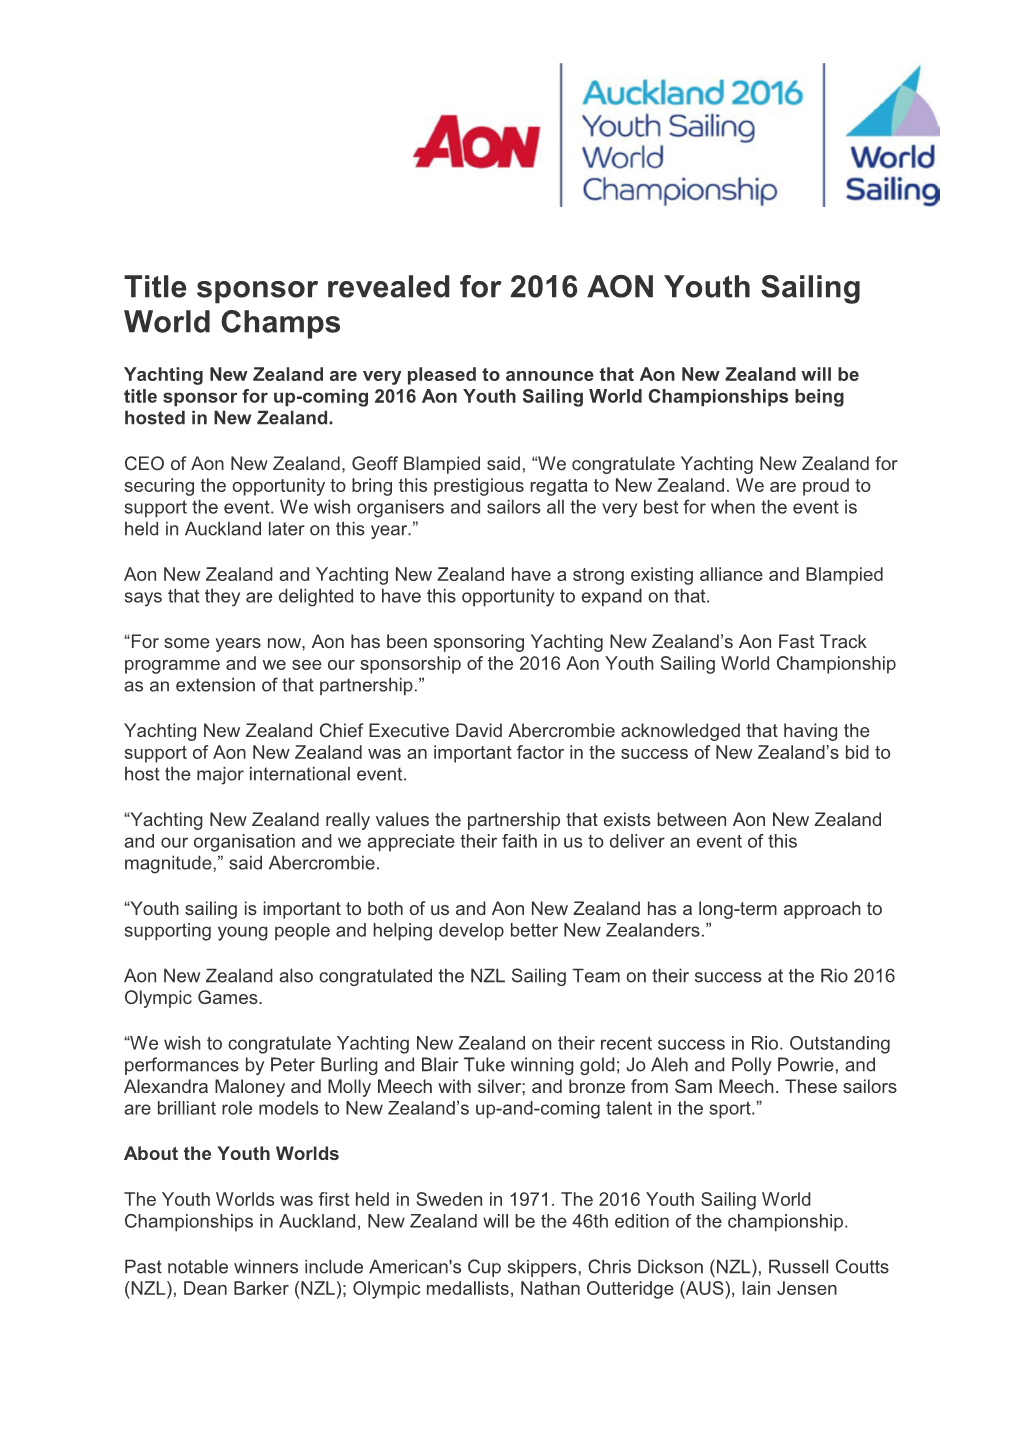 Title Sponsor Revealed for 2016 AON Youth Sailing World Champs